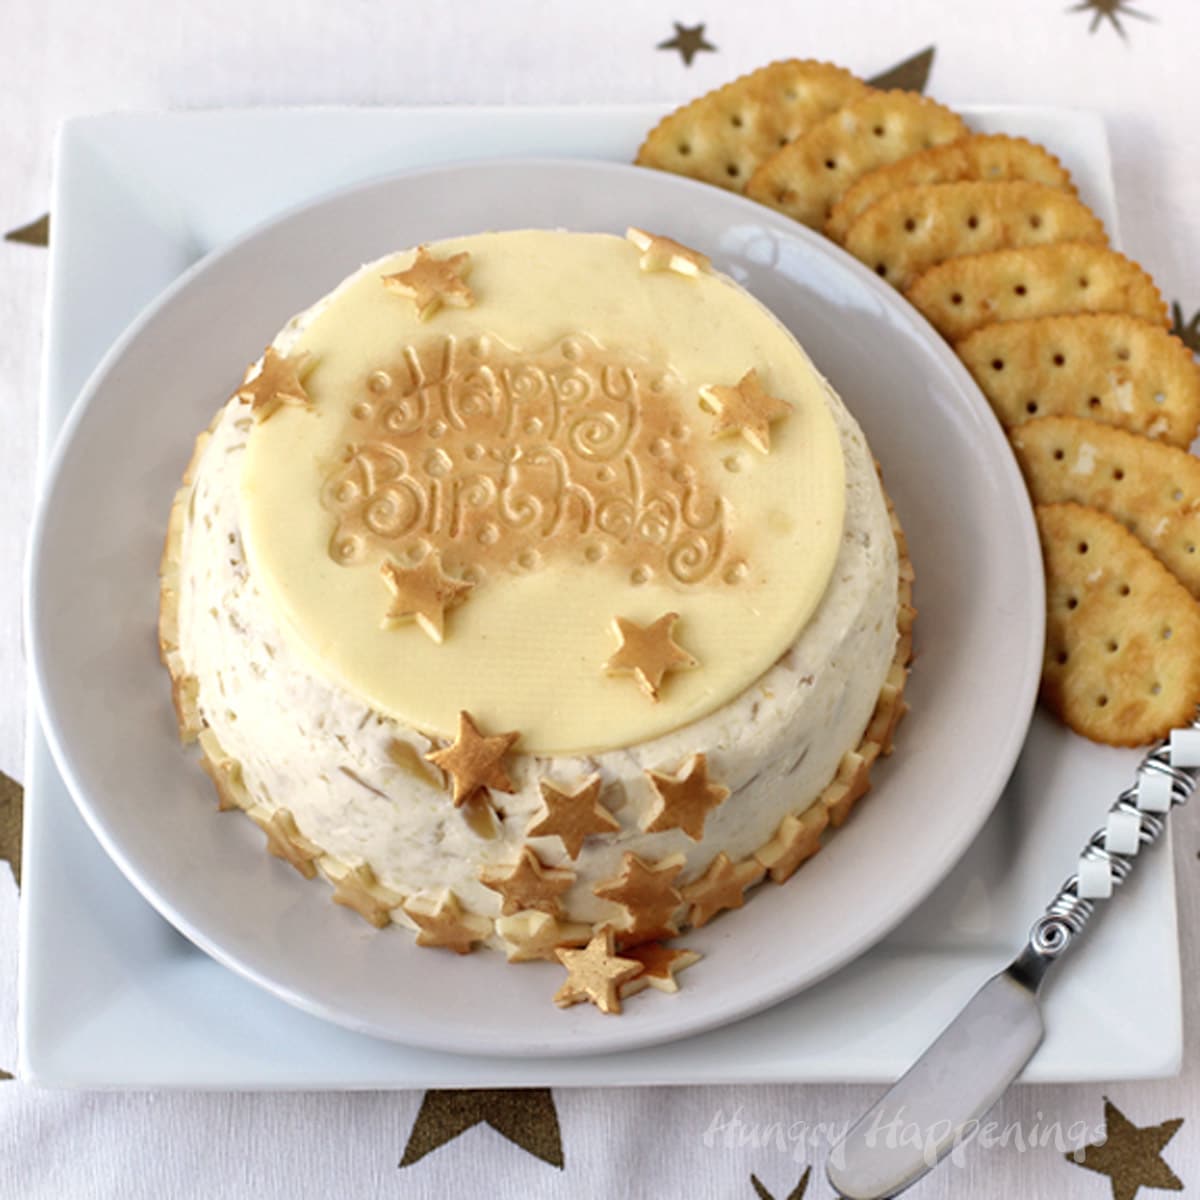 Elegant birthday cake cheese ball topped with gold-colored cheese stars and a "happy birthday" topper.